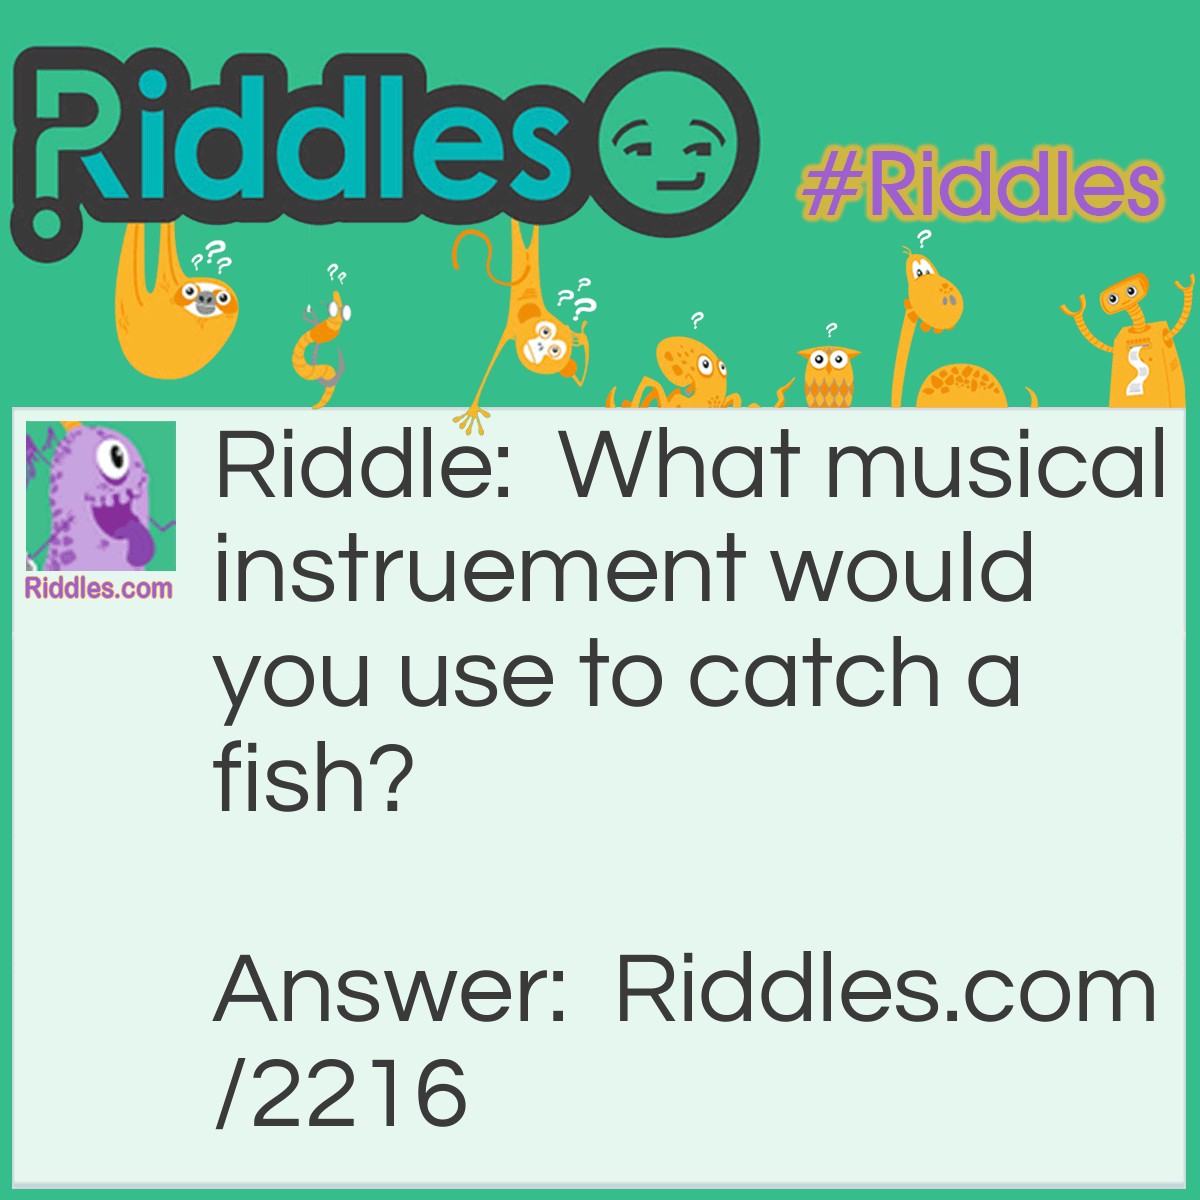 Riddle: What musical instrument would you use to catch a fish? Answer: Castanets.